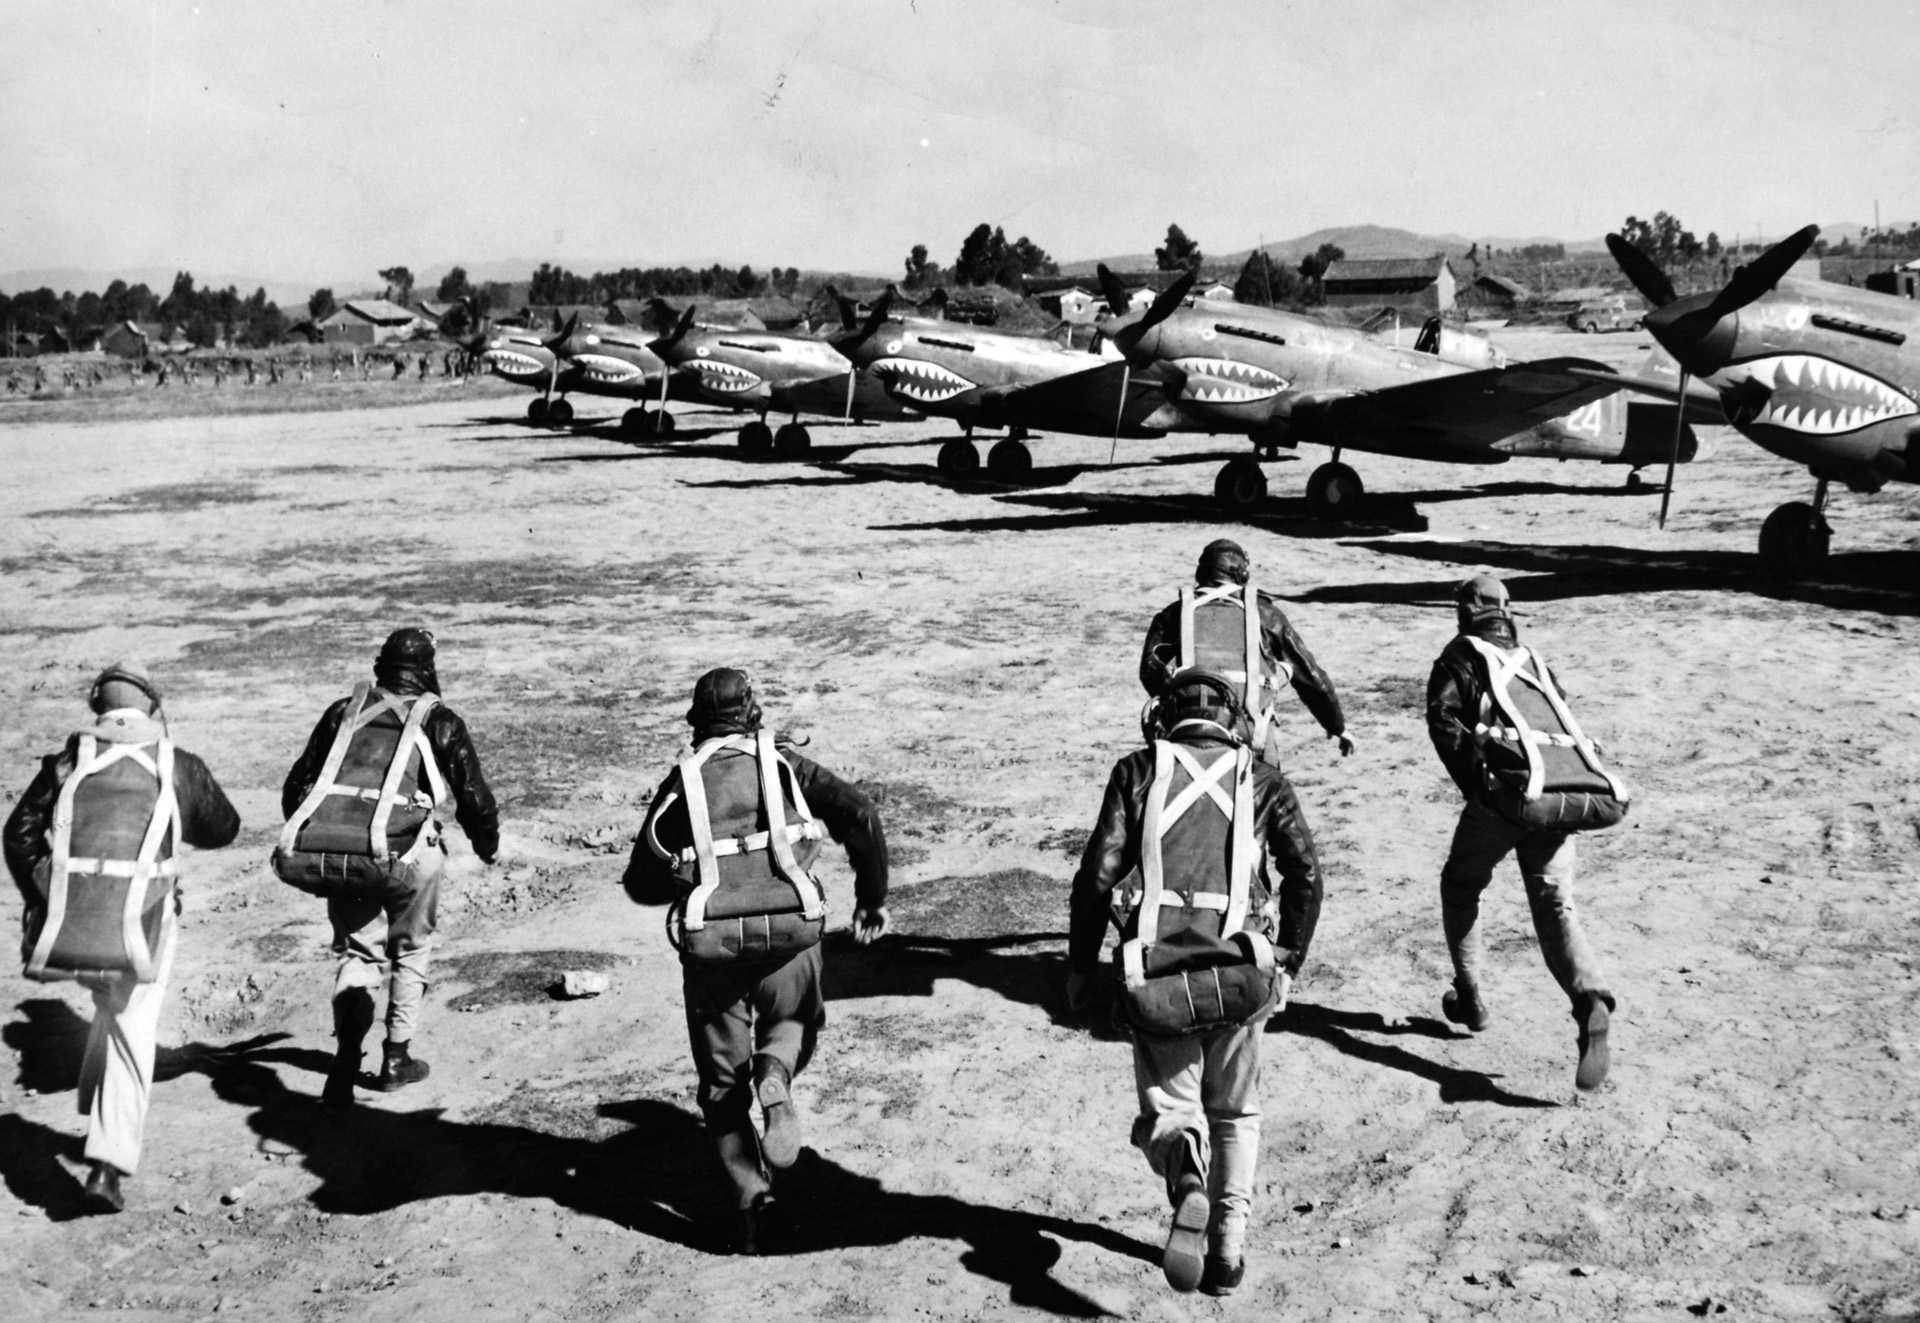 This photo, meant to buoy morale in the fight against the Japanese, shows pilots of the American  Volunteer Group, famously known as the Flying Tigers, rushing toward their waiting P-40 fighter planes. 